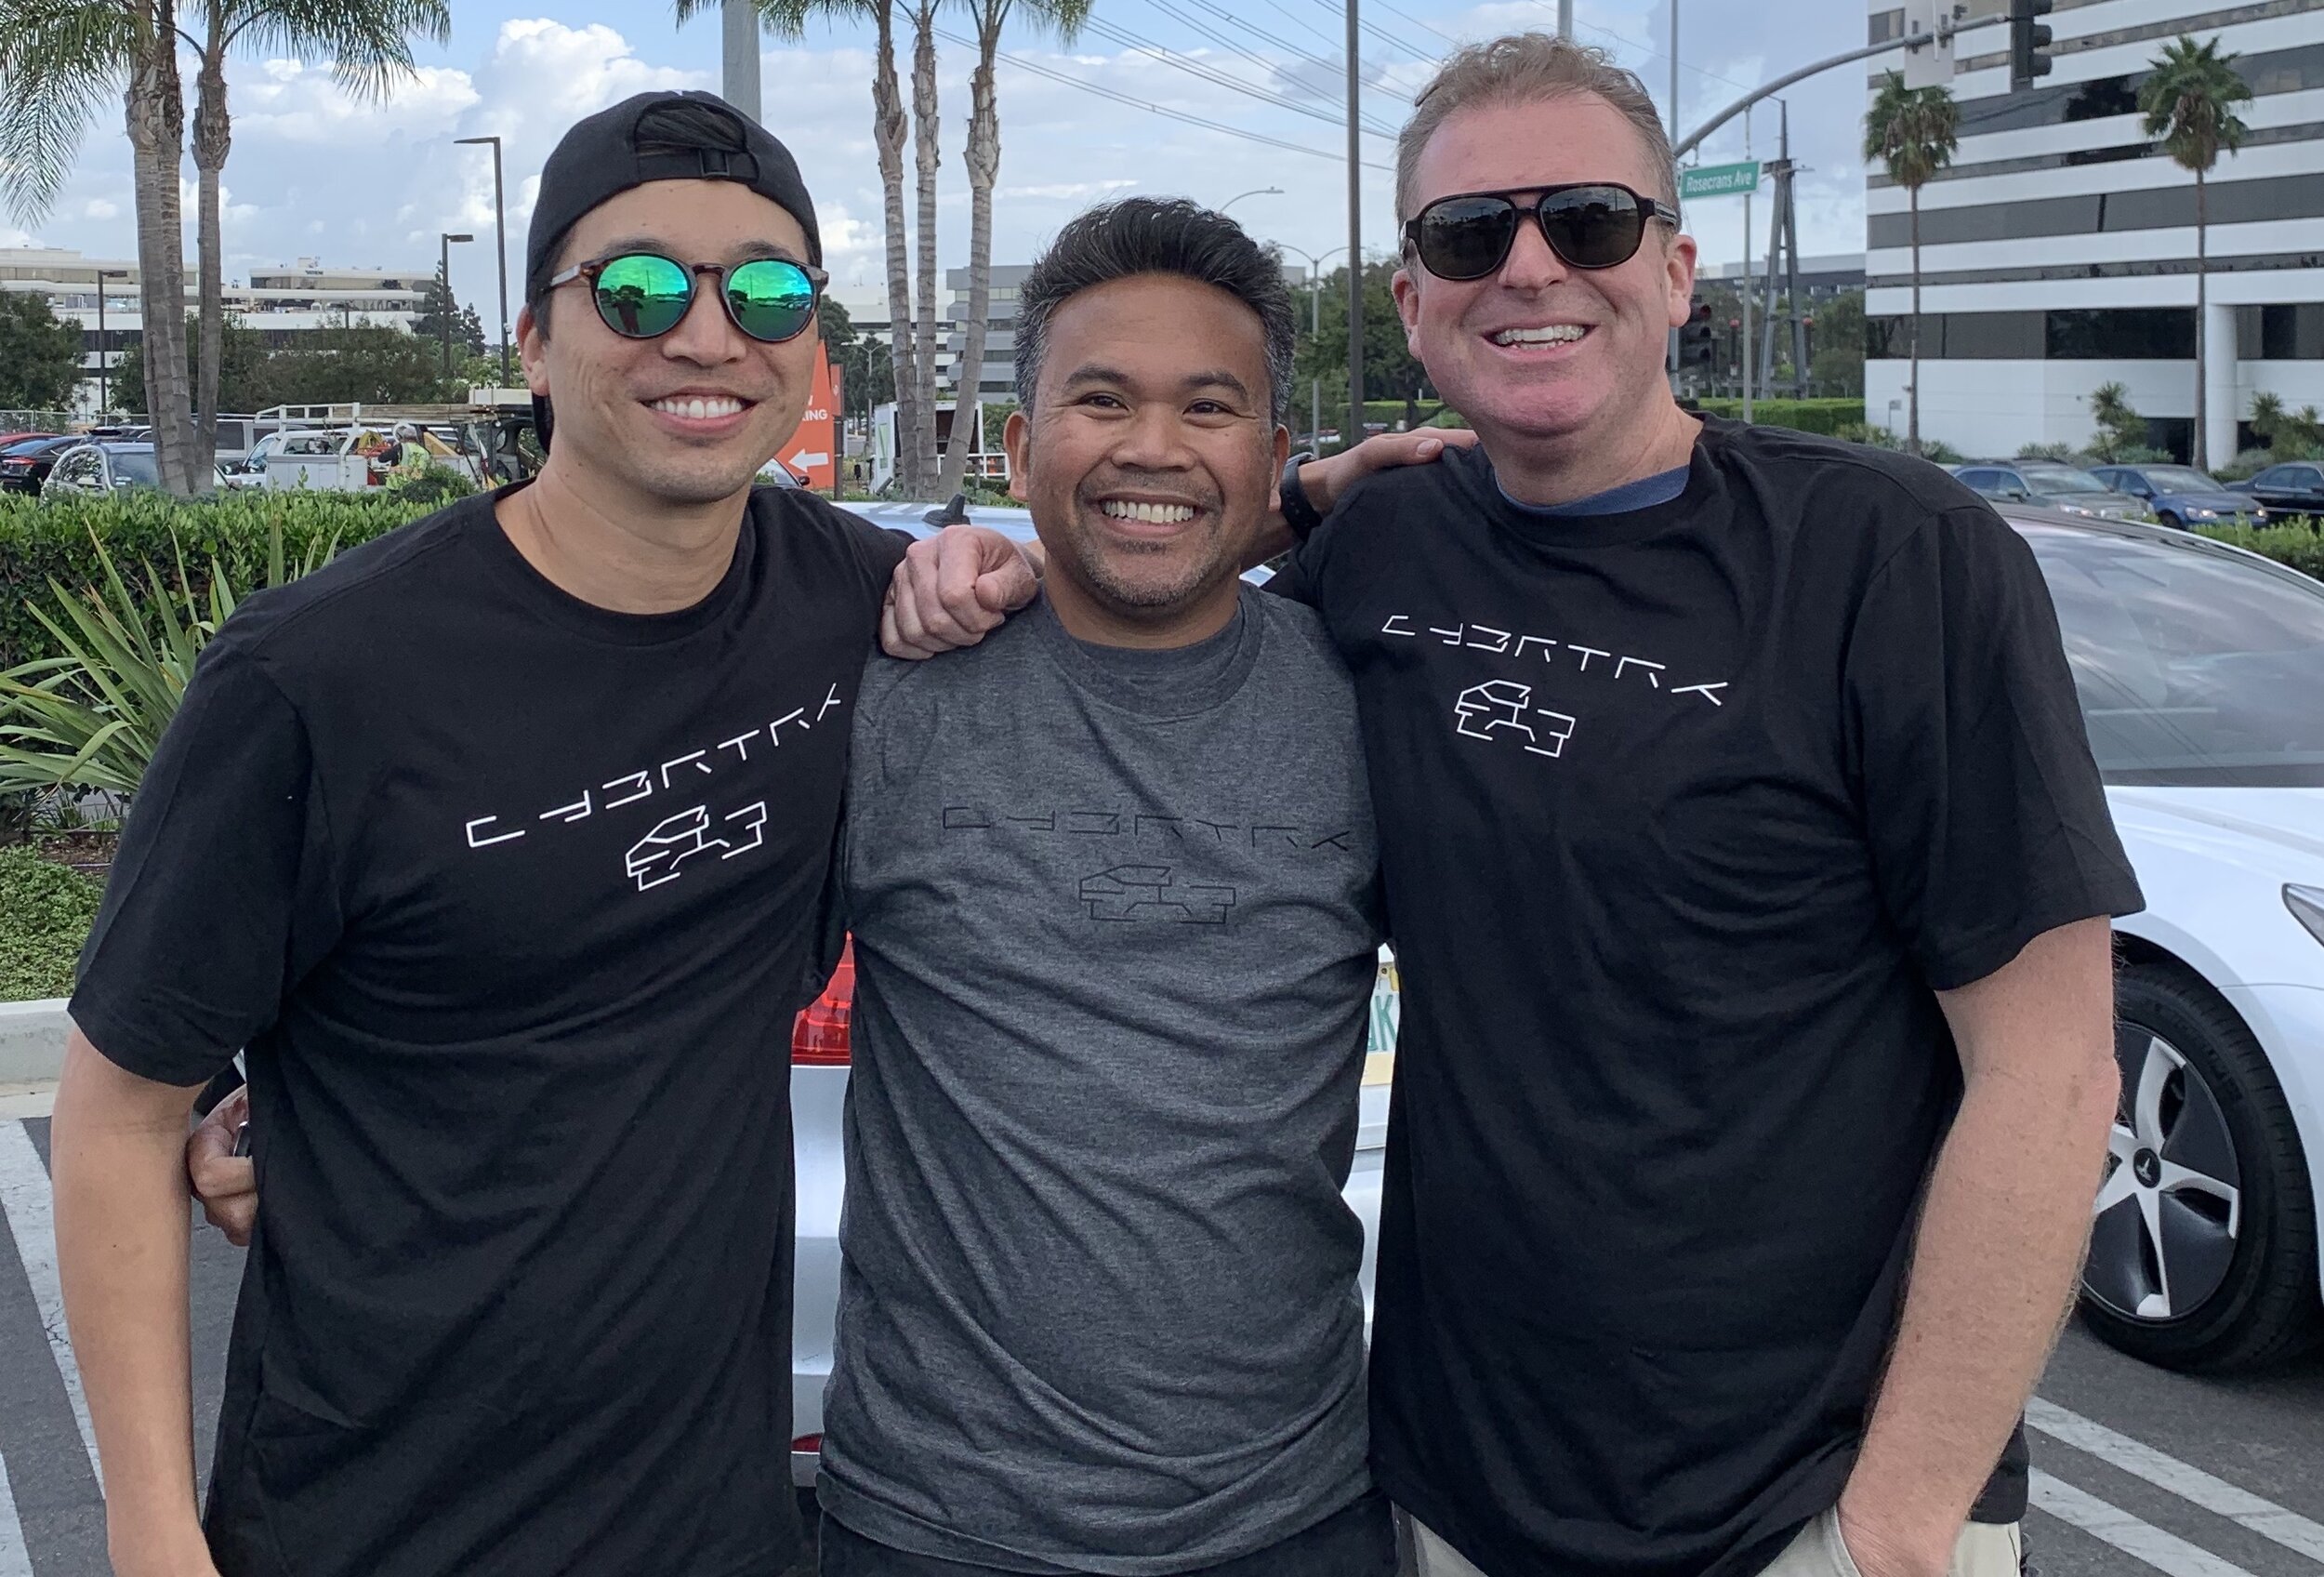 November 21st, 2019 - Tesla Cybertruck unveiling in Hawthorne California. (Pictured L to R): Al, Wilmer, Chad